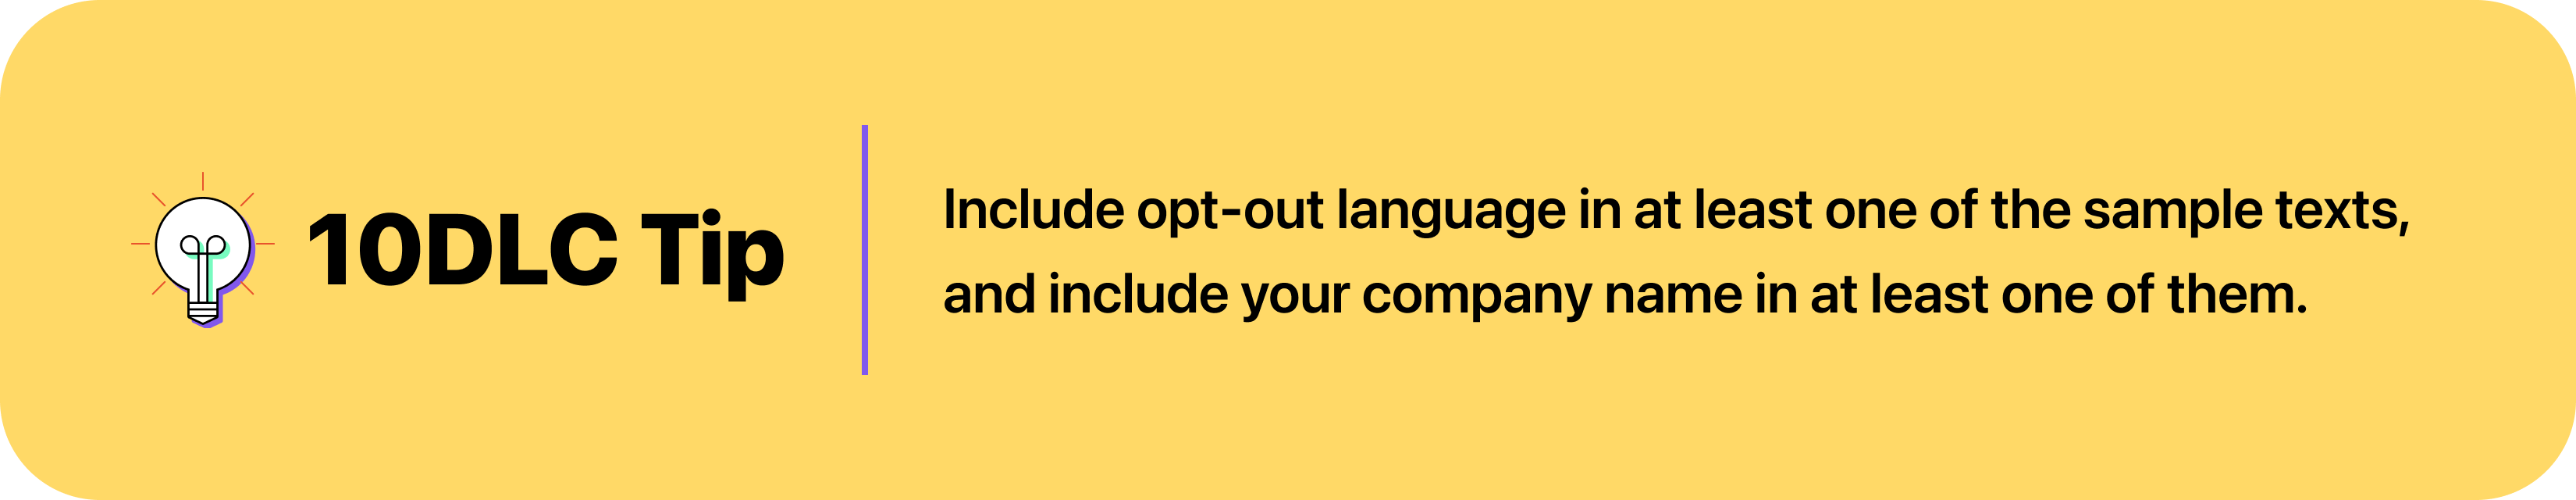 Include opt-out language in at least one of the sample texts, and include your company name in at least one of them.